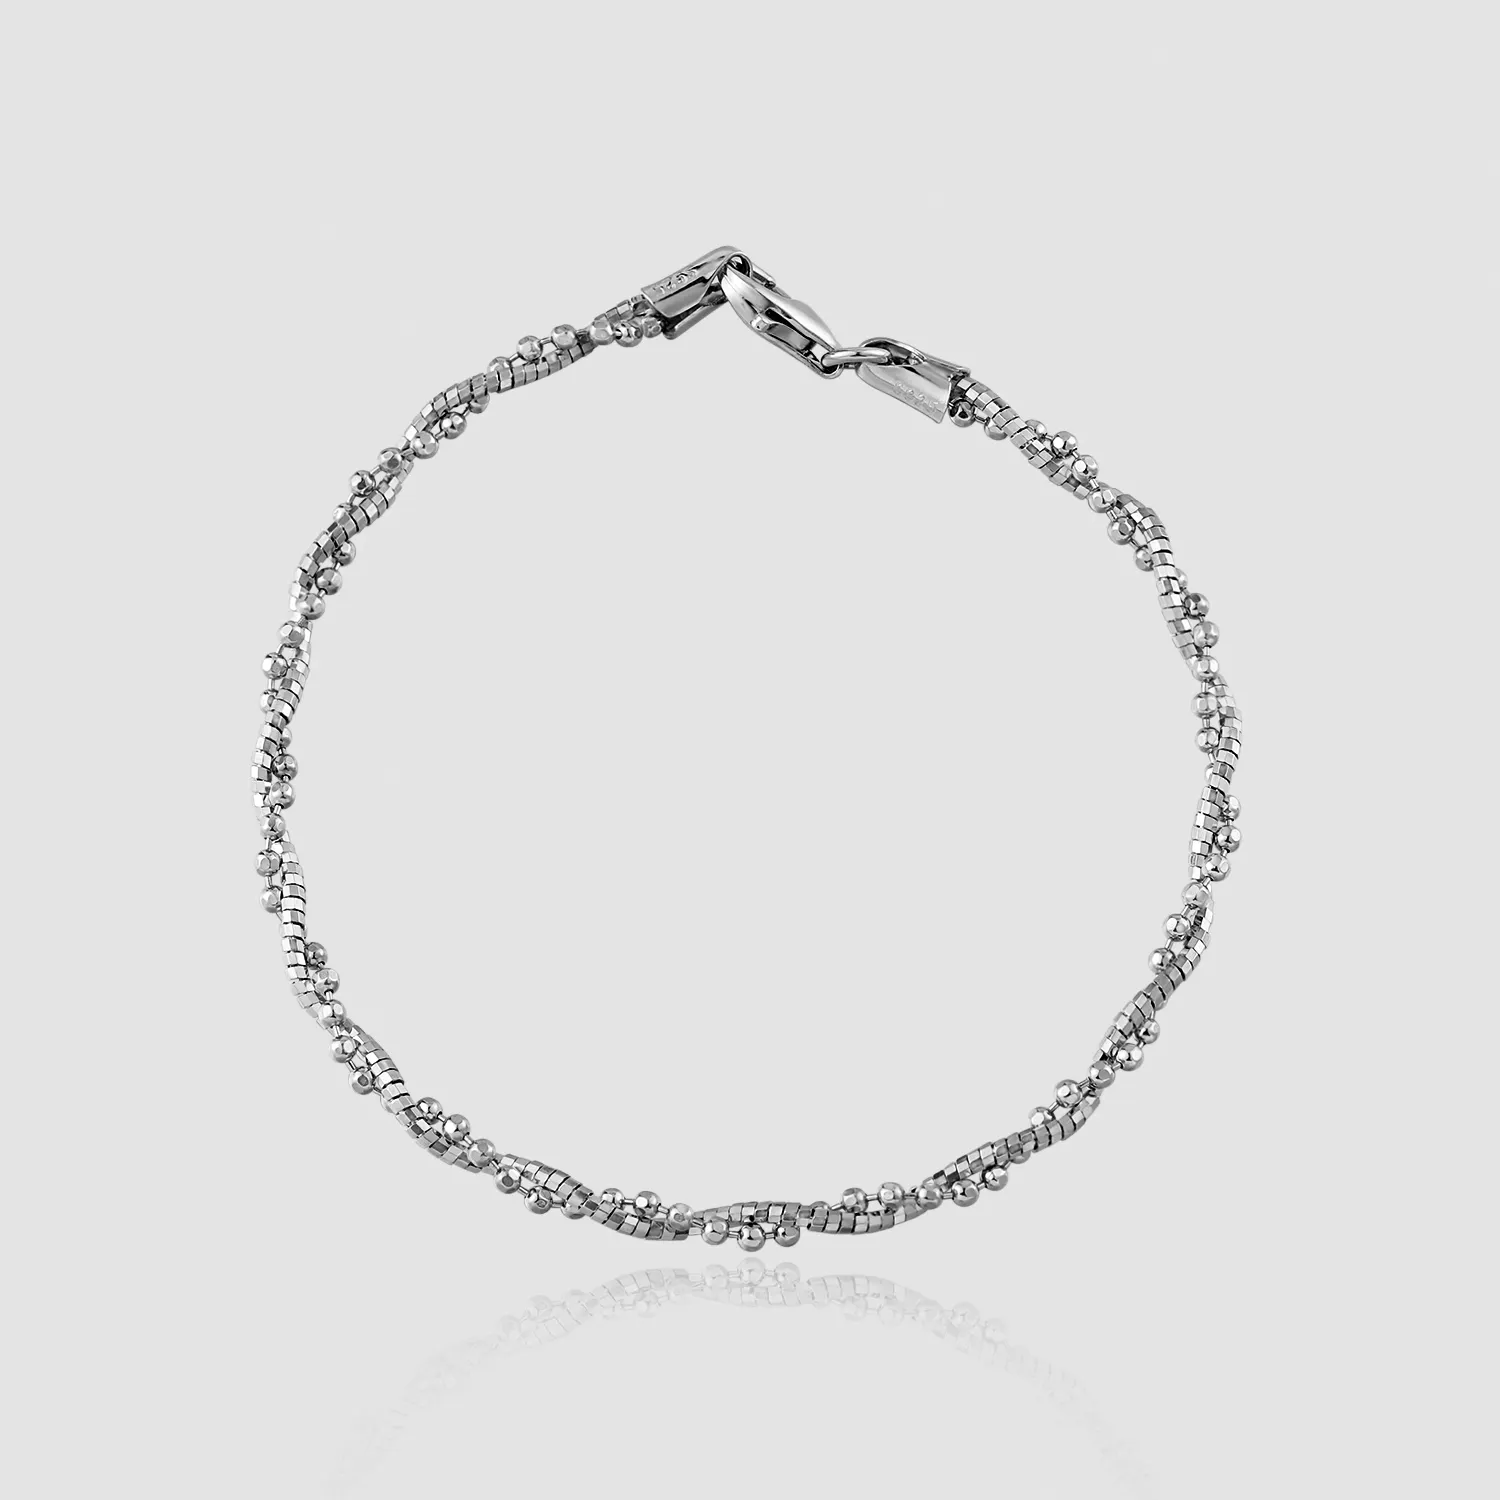 Herrenmode Perlen Röhren Twisted Double Layers Sterling Silber Armband